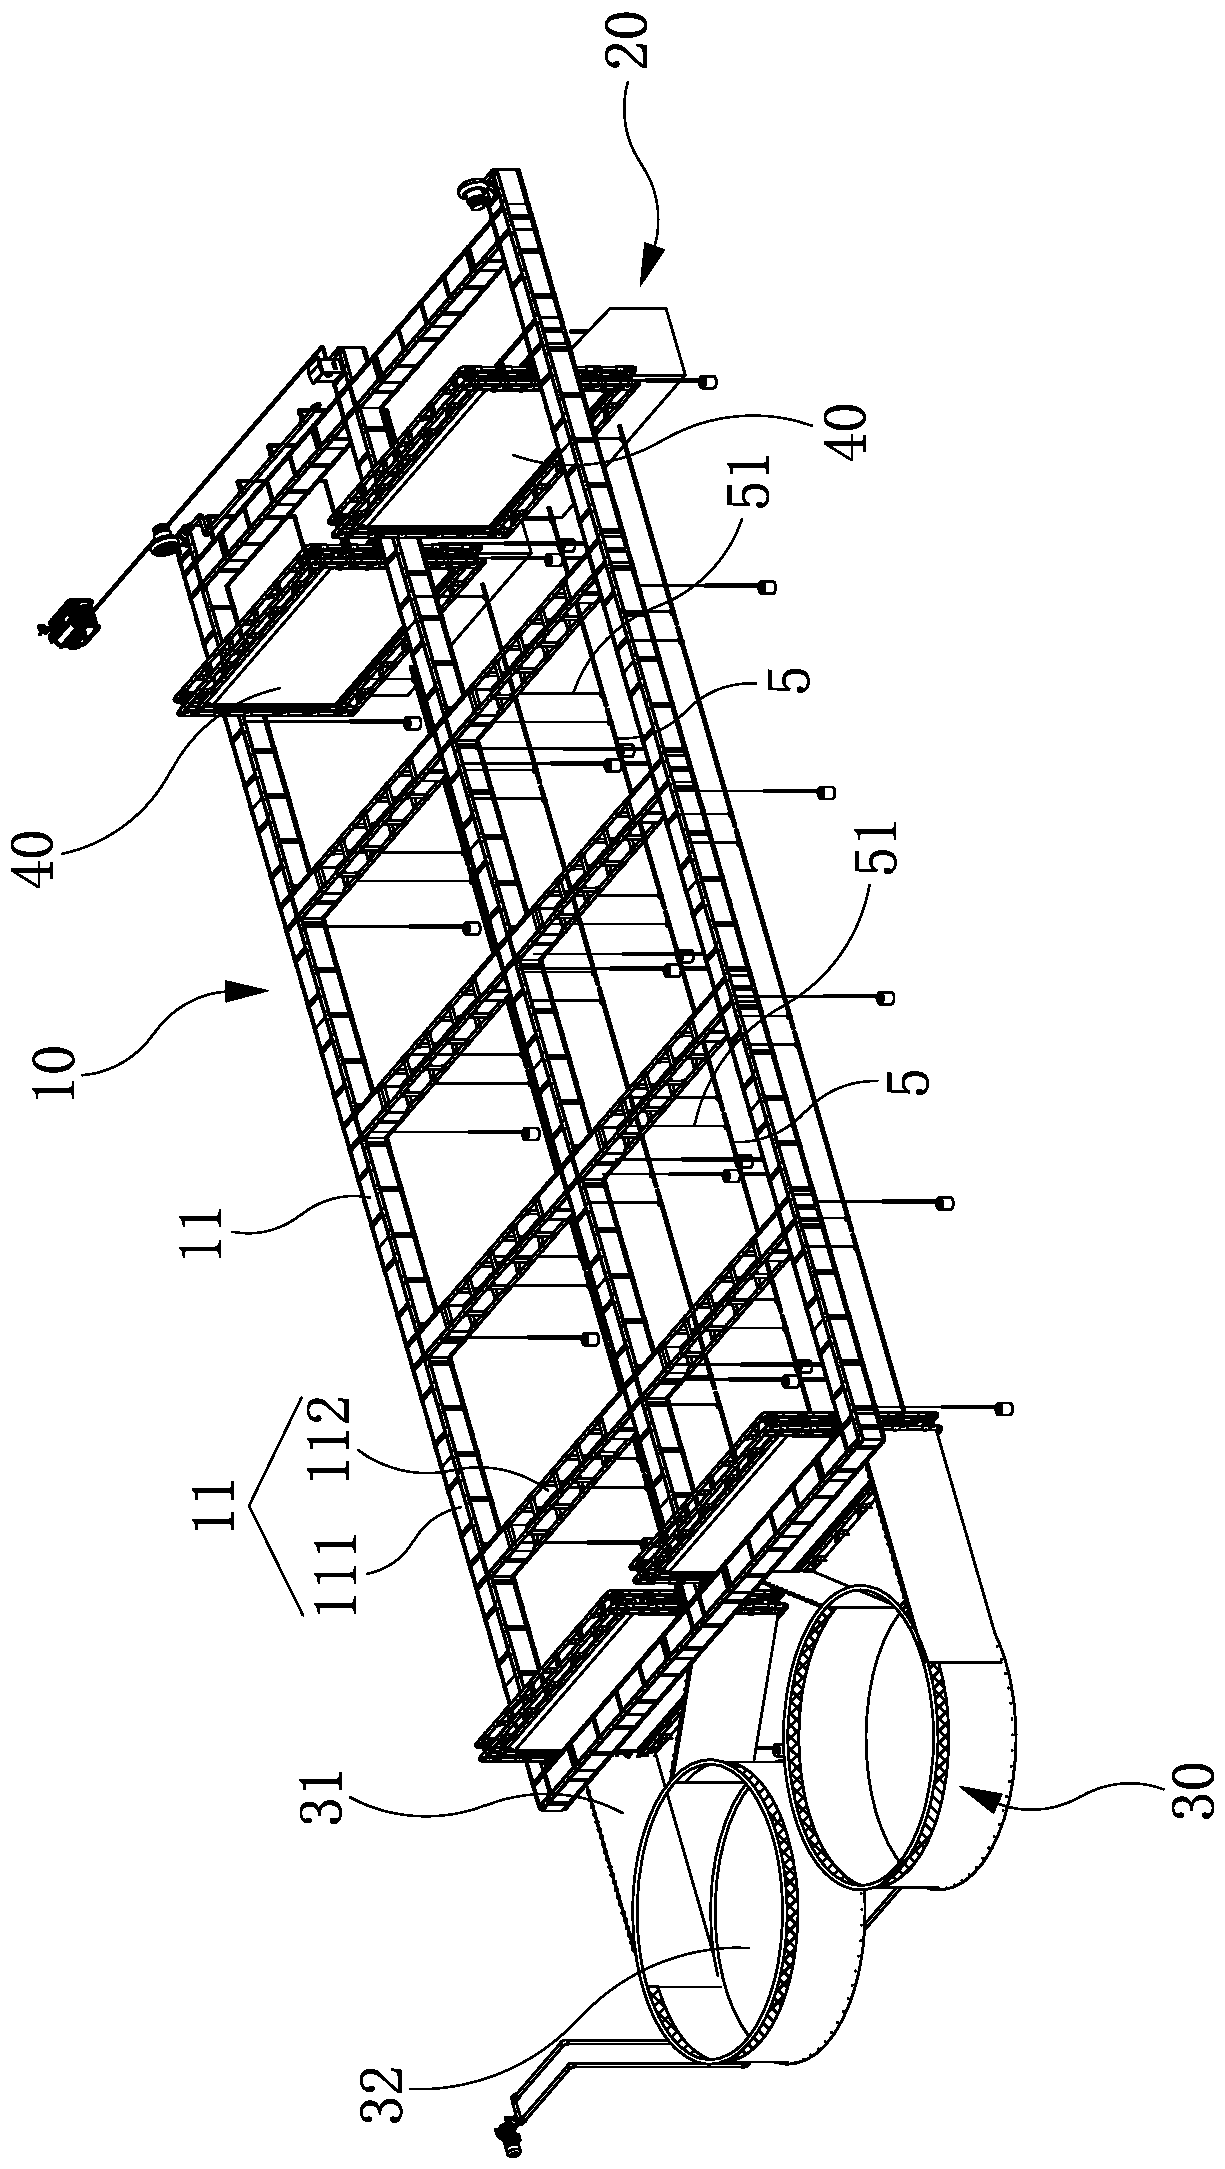 Regional fishing device and method for circulating-water cage culture